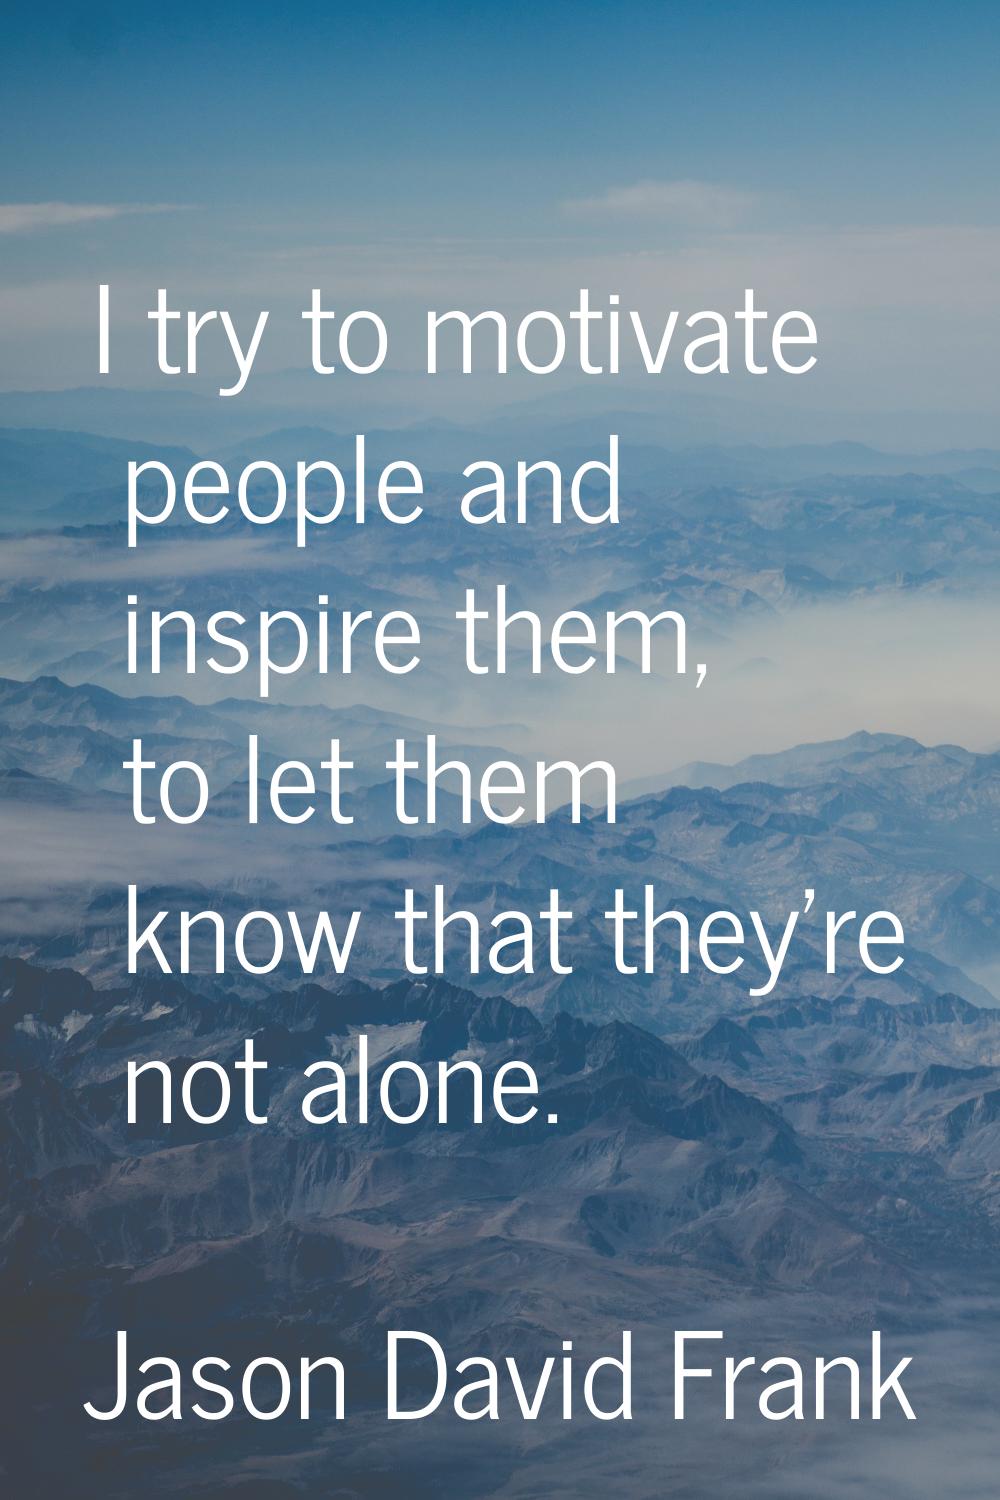 I try to motivate people and inspire them, to let them know that they're not alone.